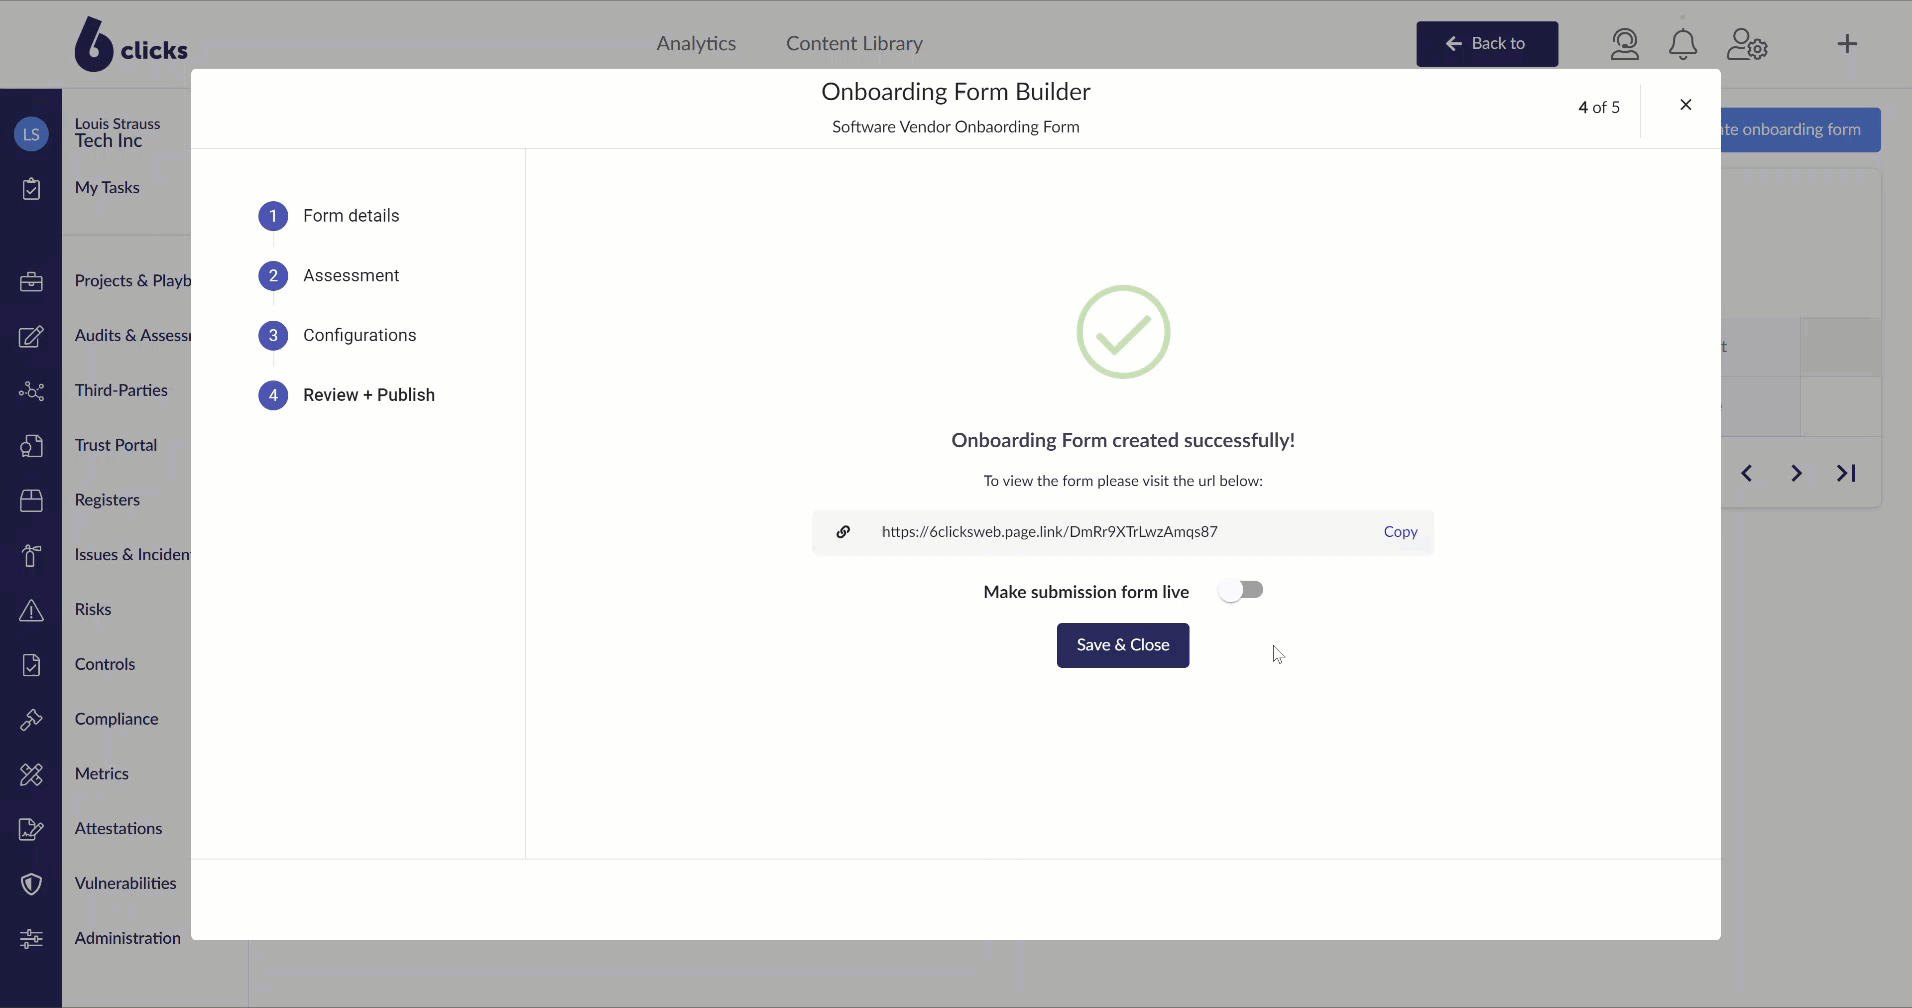 Introducing the onboarding form builder for third parties and vendors